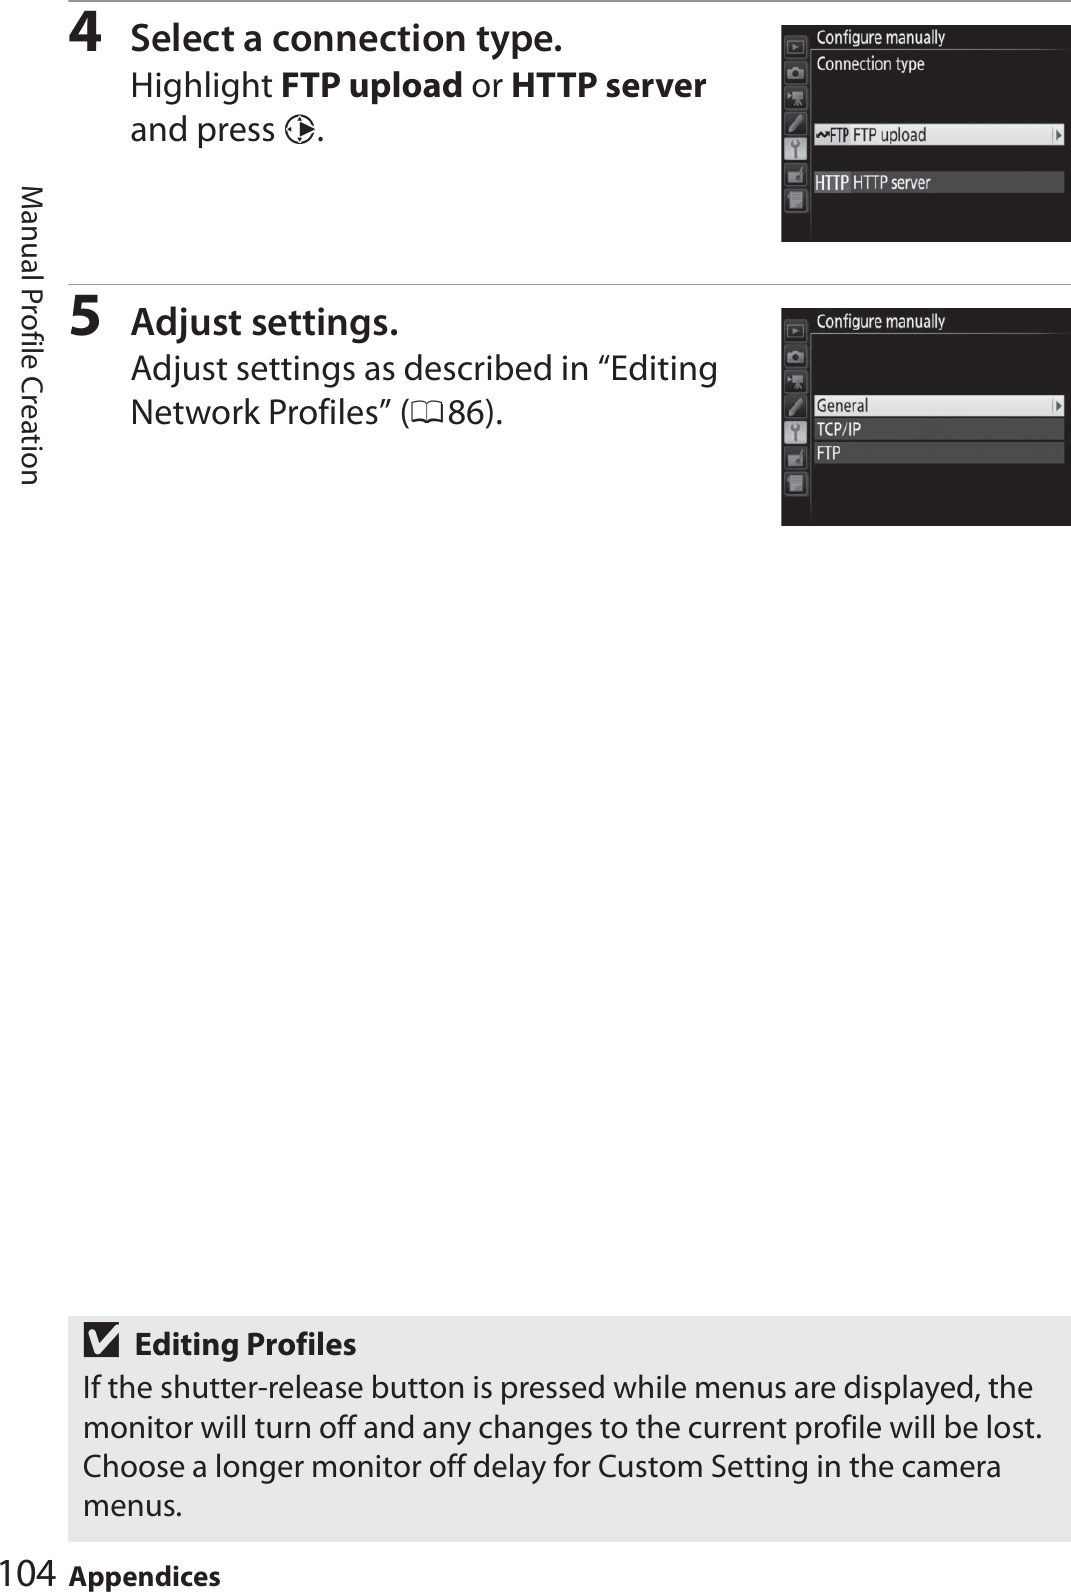 104 AppendicesManual Profile Creation4Select a connection type.Highlight FTP upload or HTTP server and press 2.5Adjust settings.Adjust settings as described in “Editing Network Profiles” (086).DEditing ProfilesIf the shutter-release button is pressed while menus are displayed, the monitor will turn off and any changes to the current profile will be lost. Choose a longer monitor off delay for Custom Setting in the camera menus.